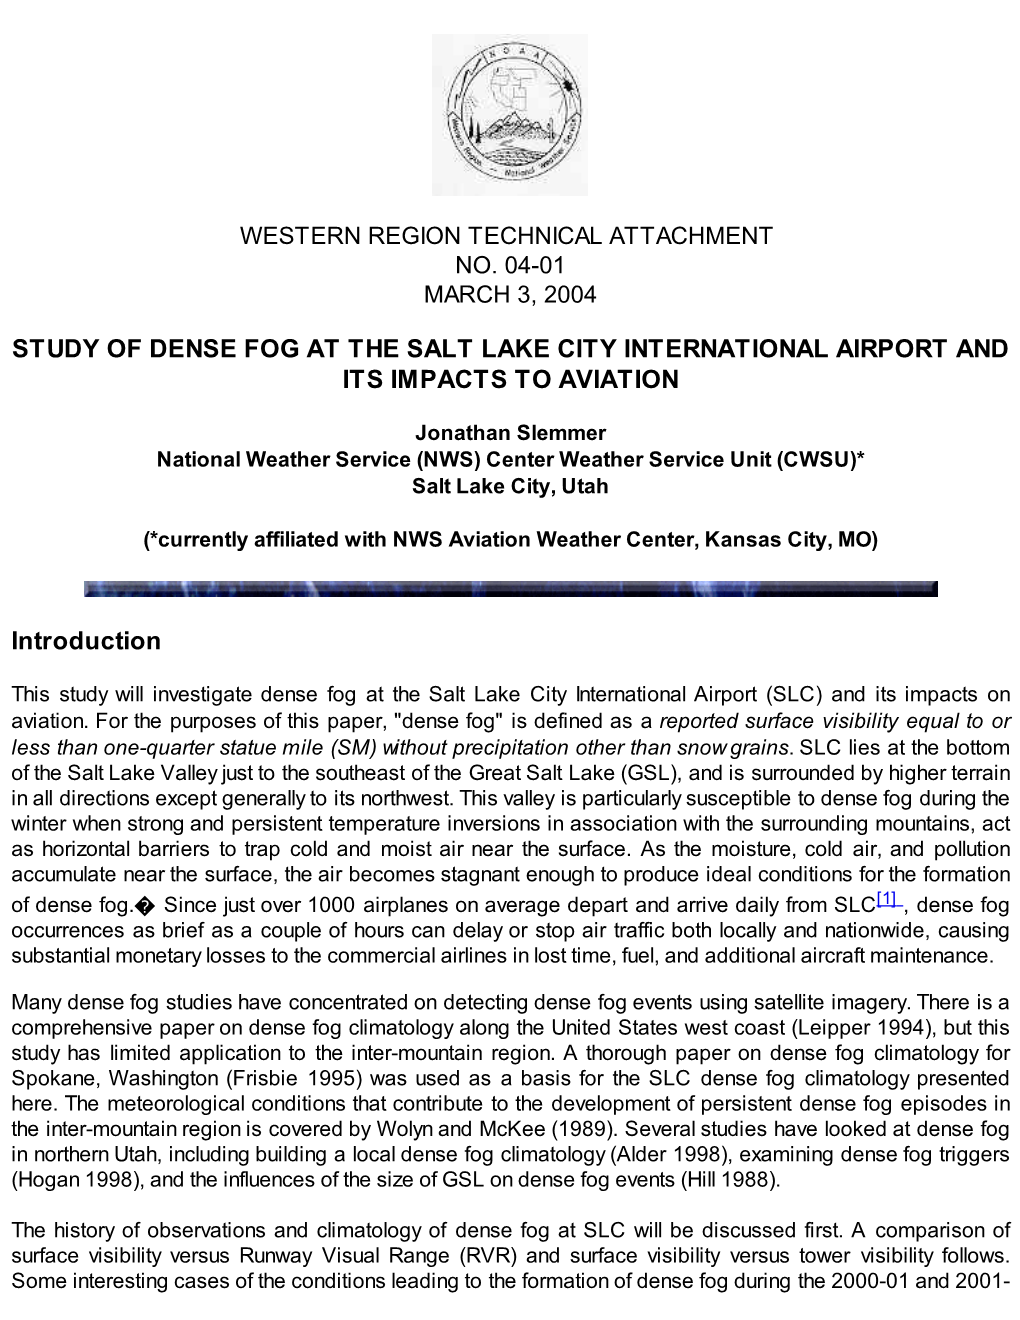 Study of Dense Fog at the Salt Lake City International Airport and Its Impacts to Aviation